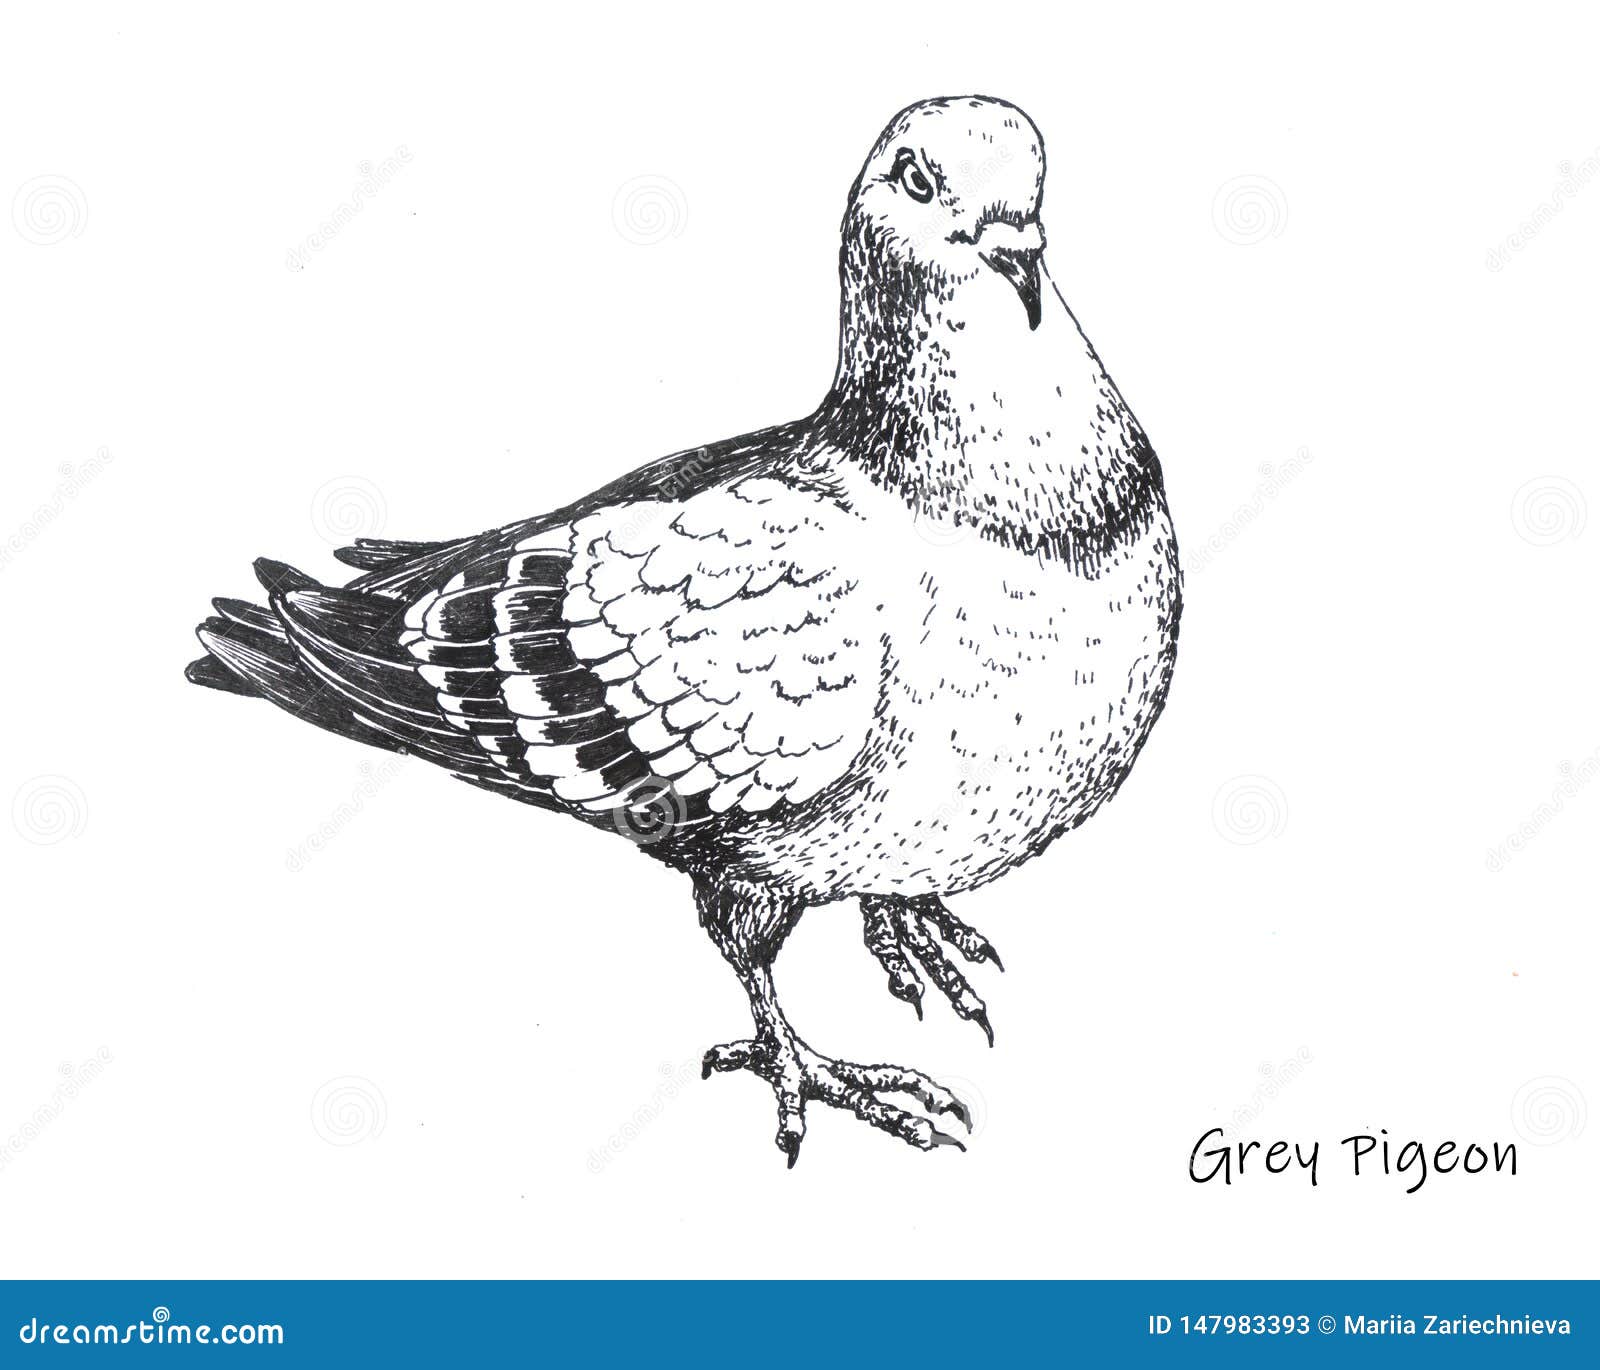 How to draw pigeon 🐦 Easy outline drawing step by step / Bird drawing -  YouTube